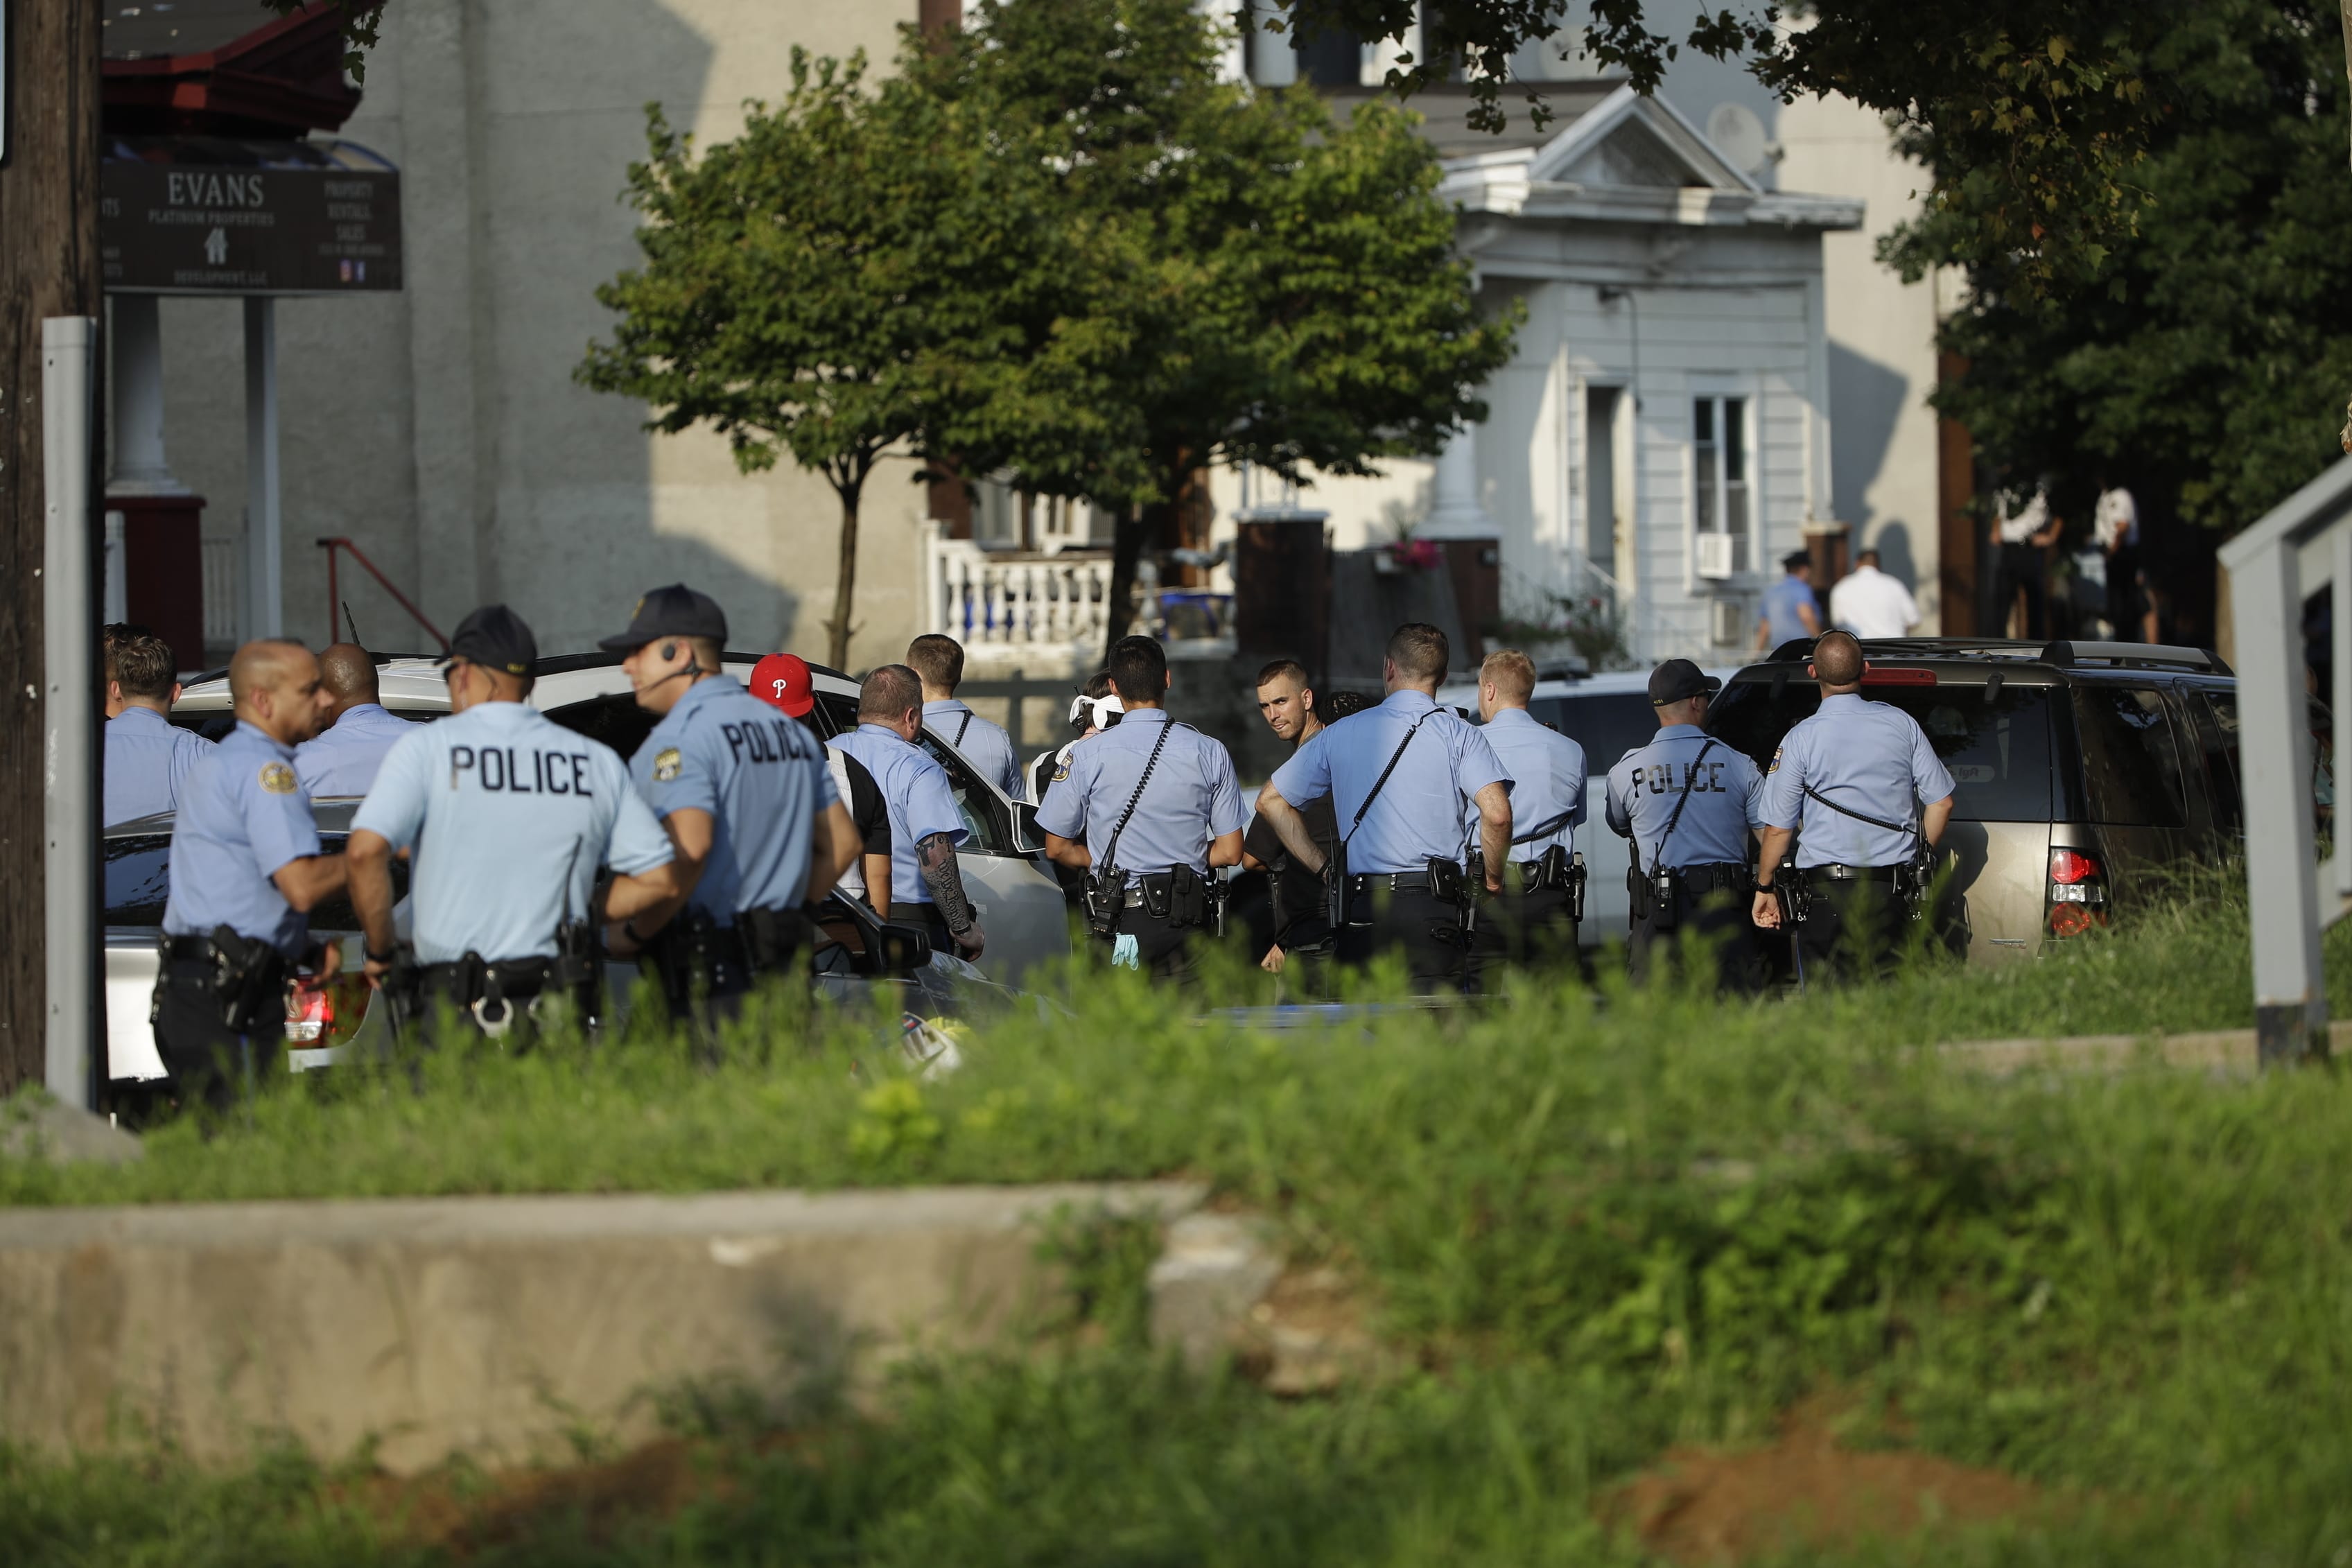 Authorities stage as they respond to an active shooting situation, Wednesday, Aug. 14, 2019, in the Nicetown neighborhood of Philadelphia.